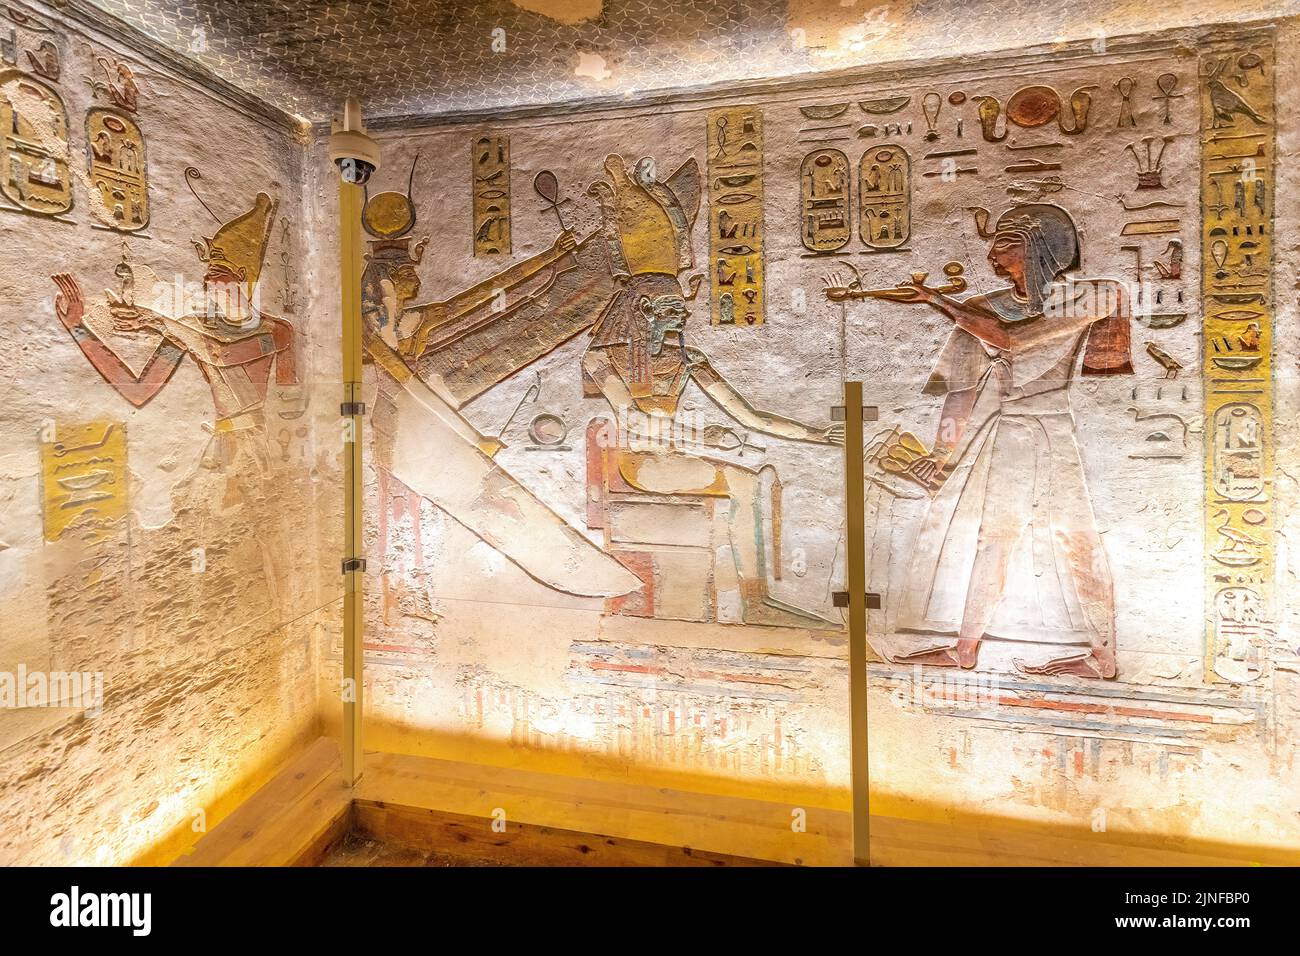 Luxor, Egypt; August 5, 2022 - The tomb of Rameses III in the Valley of the Kings, Luxor, Egypt. Stock Photo